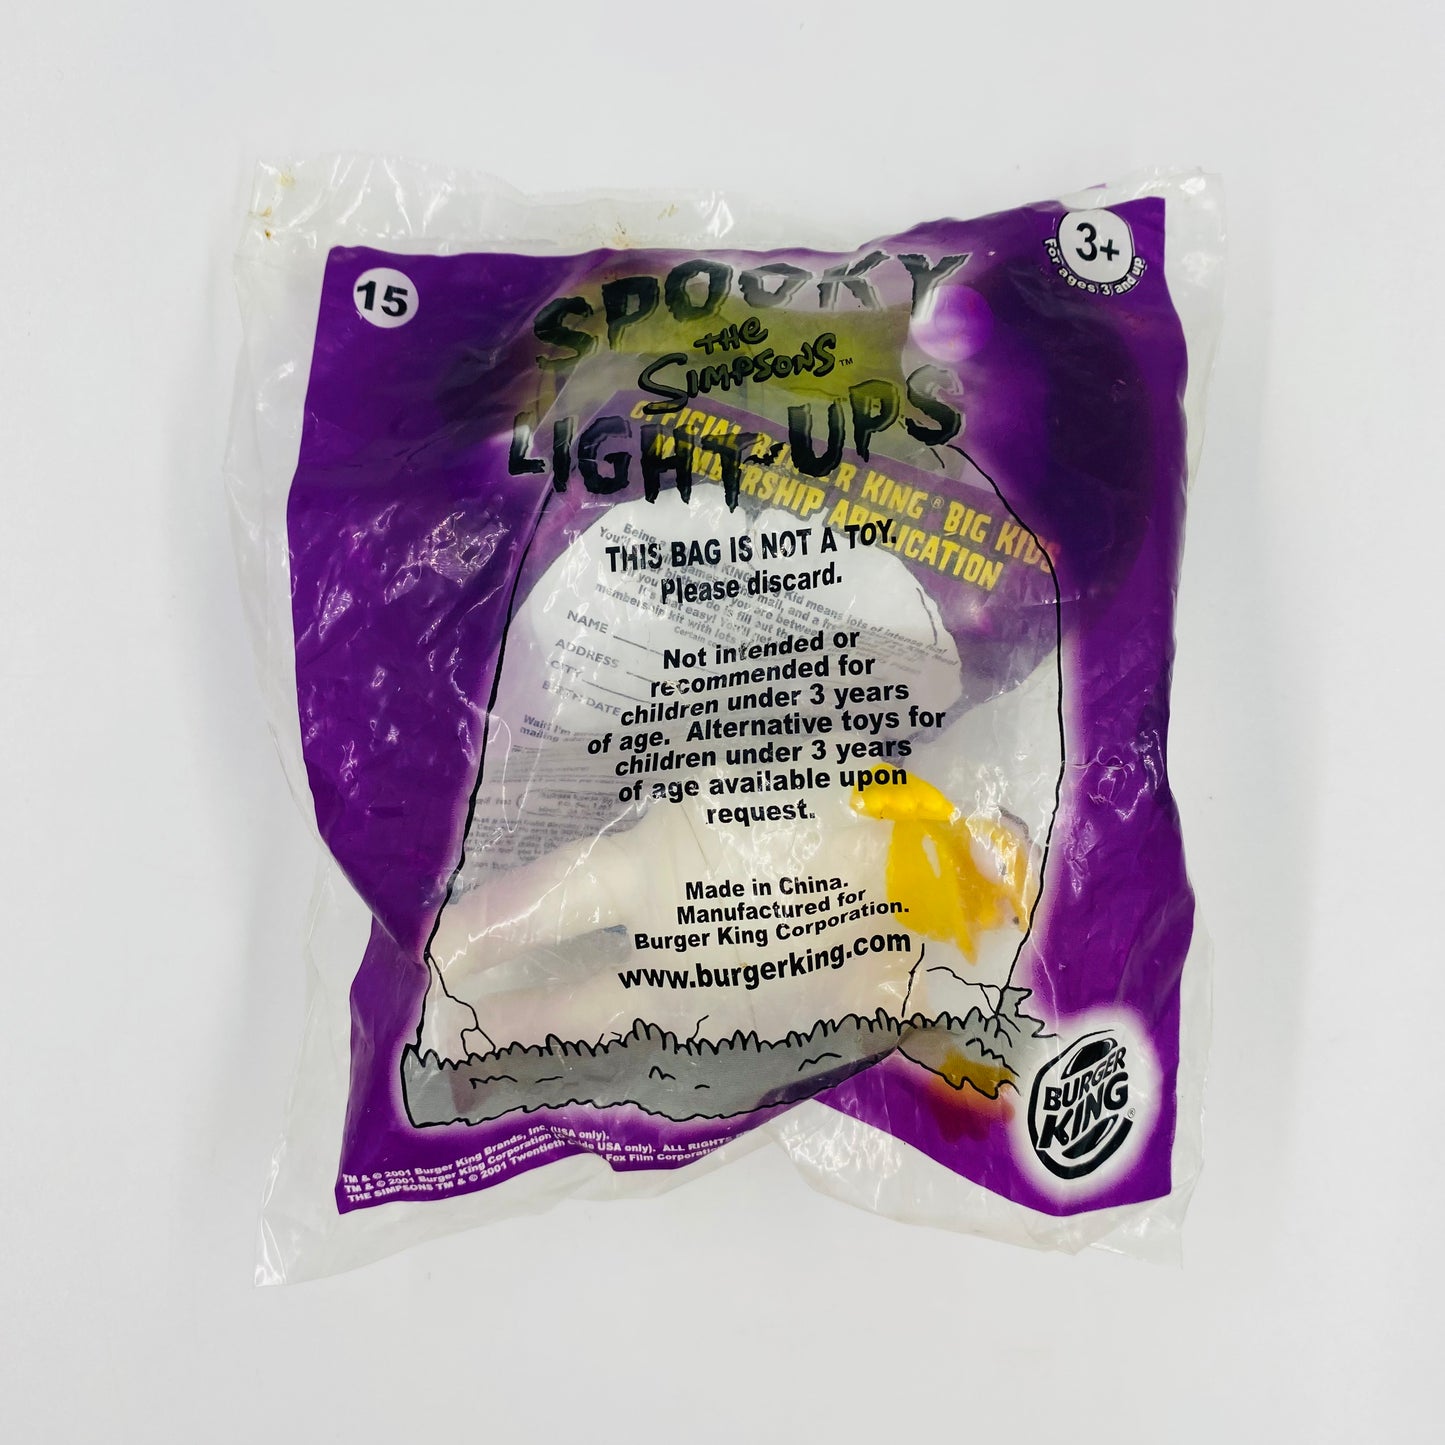 The Simpsons Spooky Light-Ups Barney Burger King Kids' Meals toy (2001) bagged